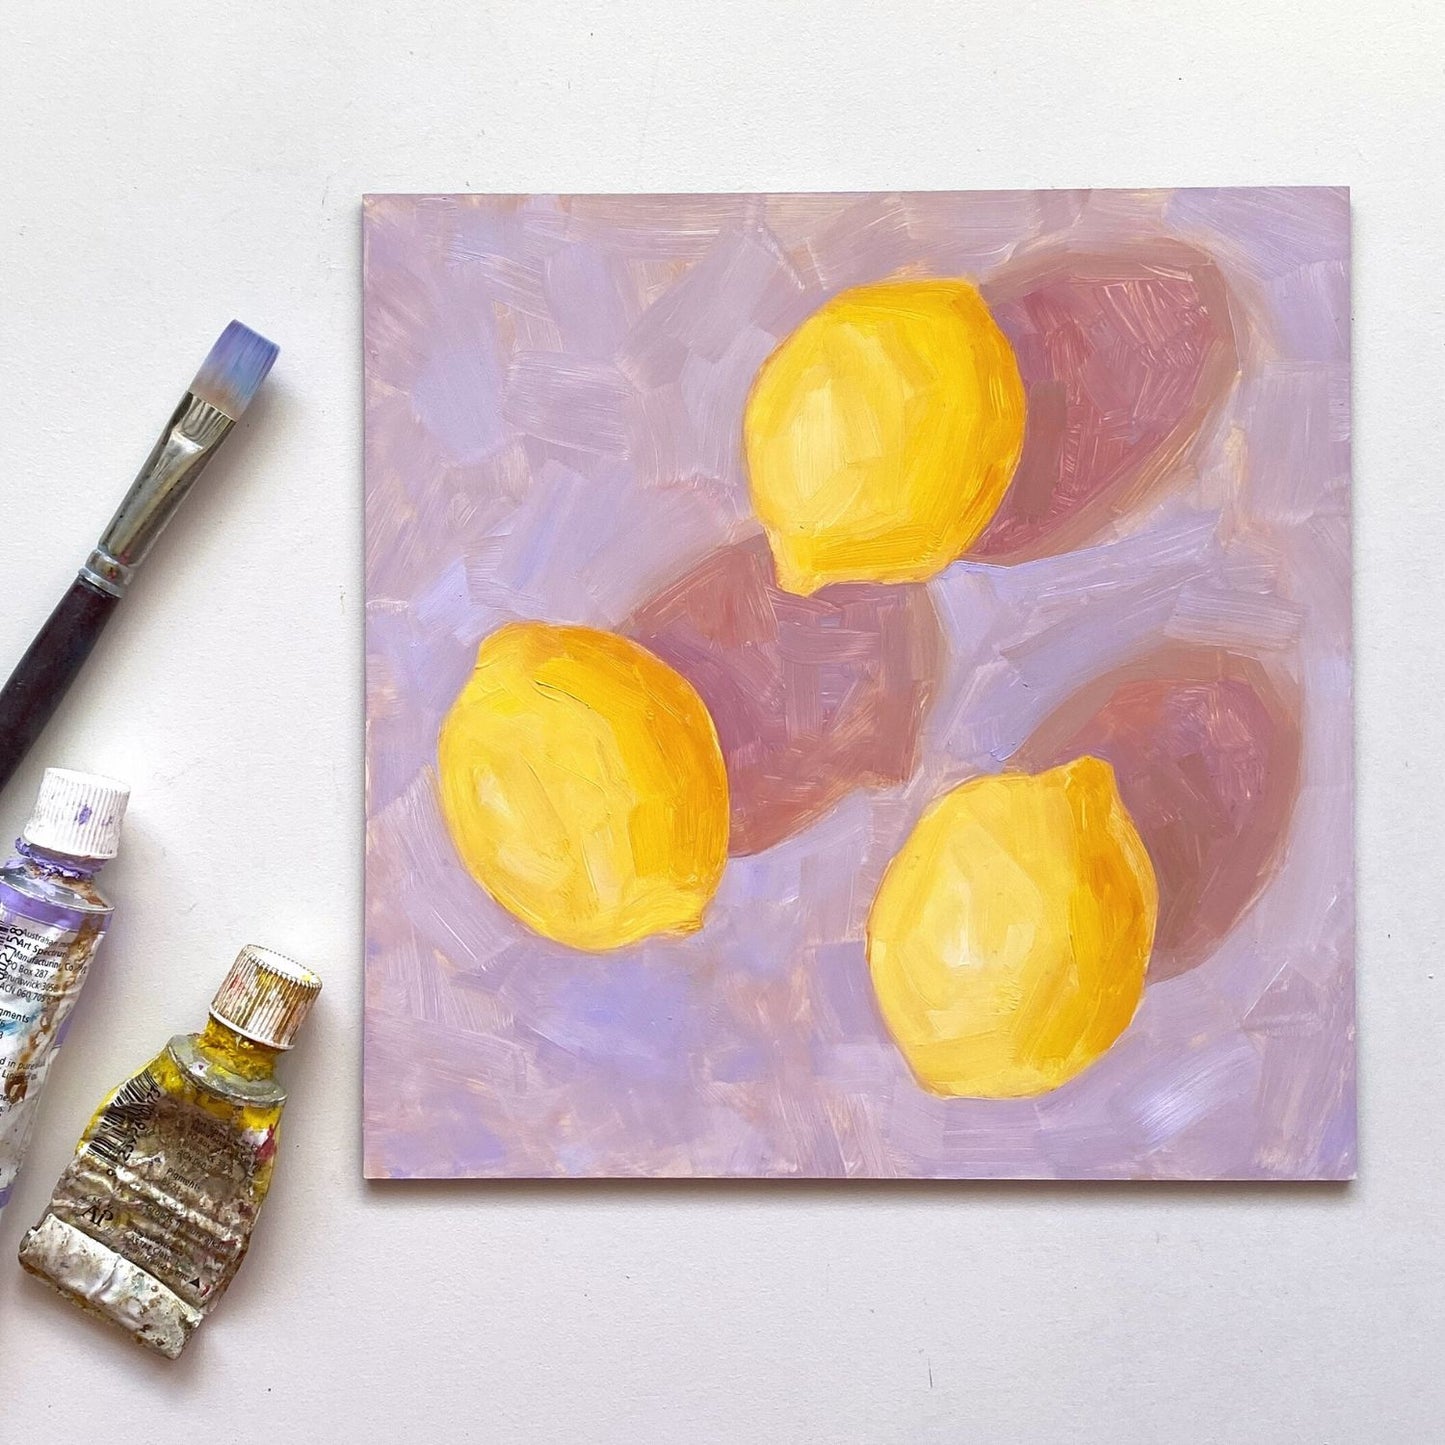 lifestyle photo of an original oil painting of three vibrant lemons with strong dark pink shadows on a textured lilac background. the artwork is on a white desk and there is a paintbrush and oil tubes next to it